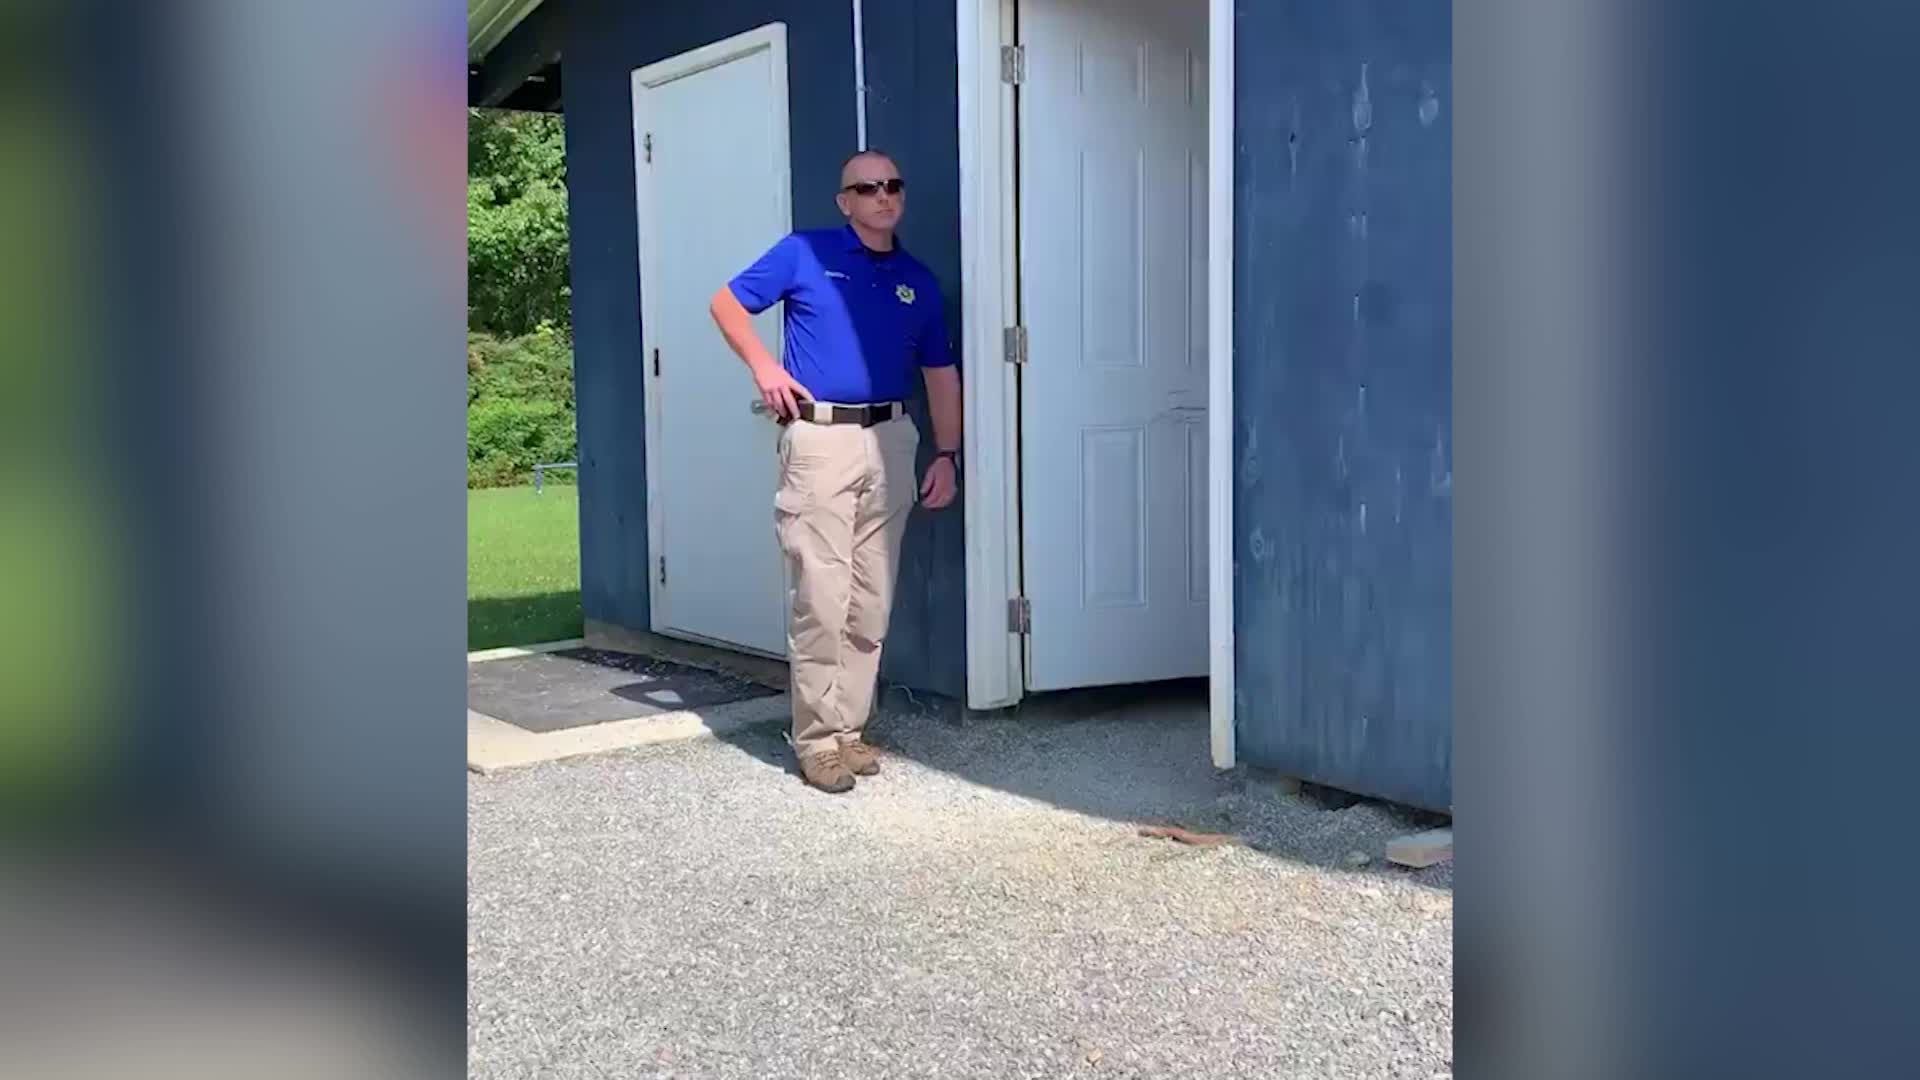 Hilarious video shows St. Tammany detective pranked with a rubber snake